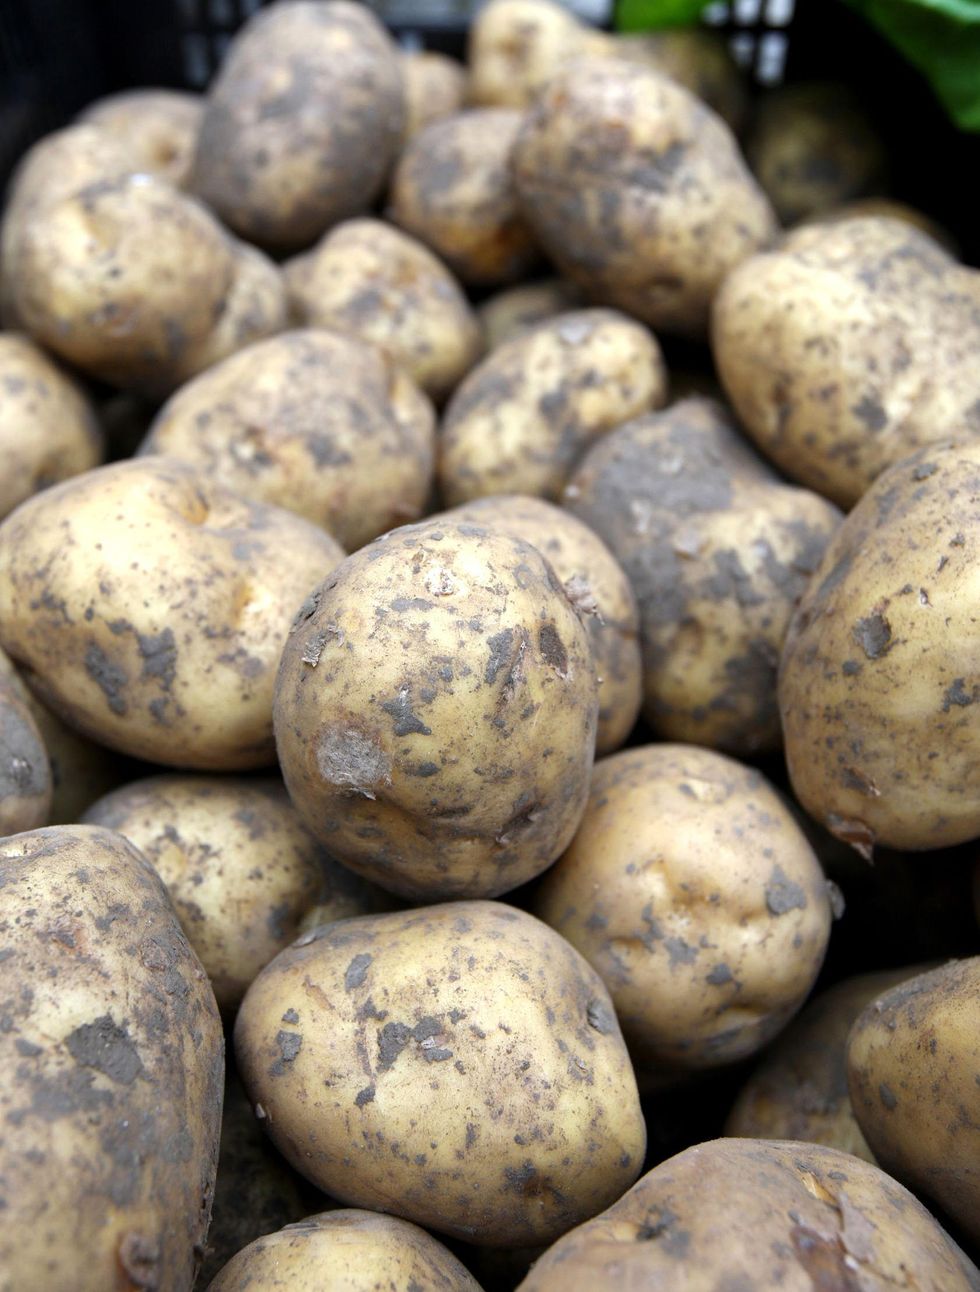 Polish scientists have found that potatoes could potentially be used to treat cancer.